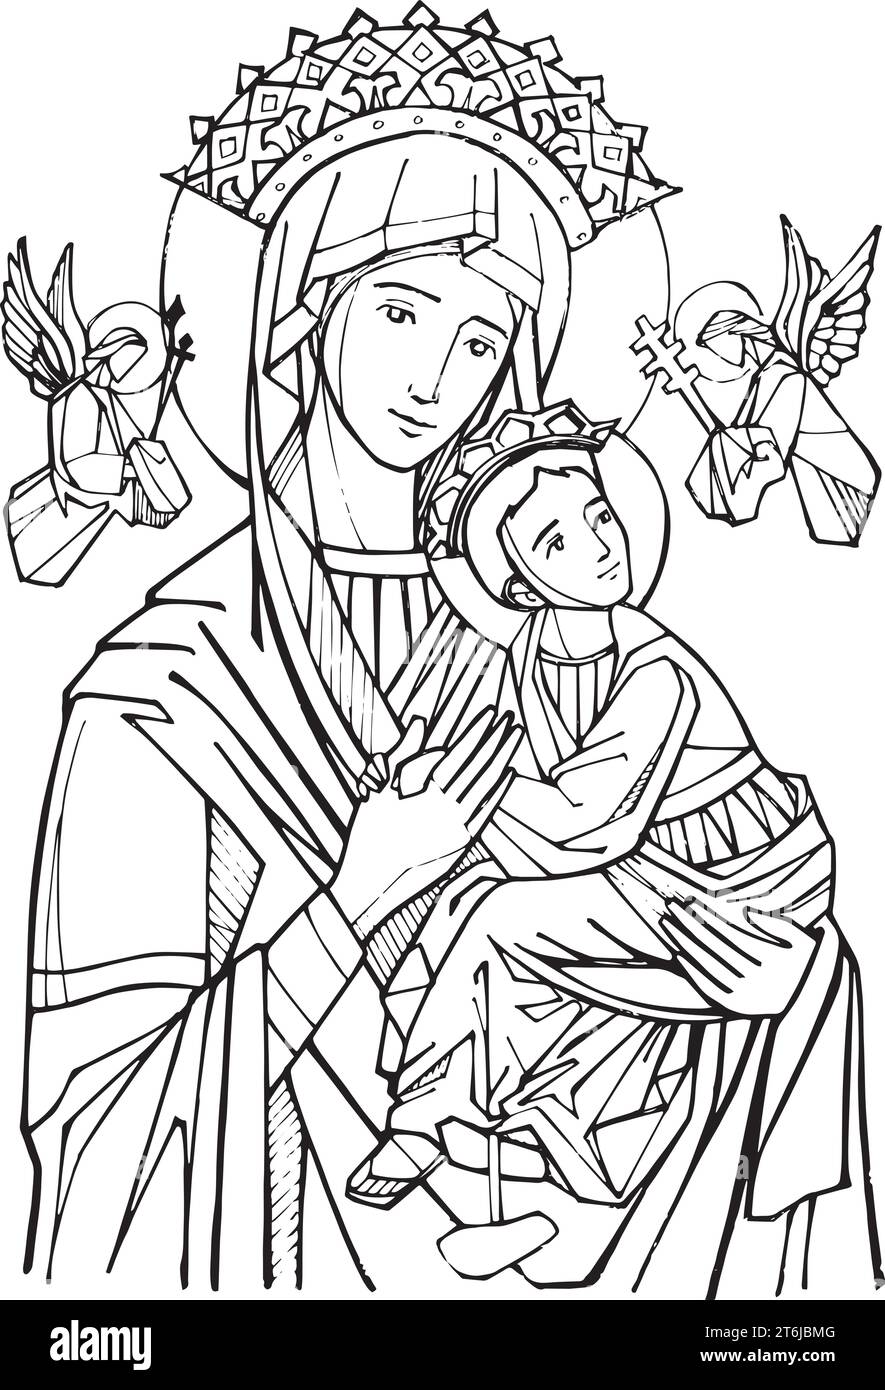 Hand drawn vector illustration or drawing of Our Lady of Perpetual help and baby Jesus Stock Vector